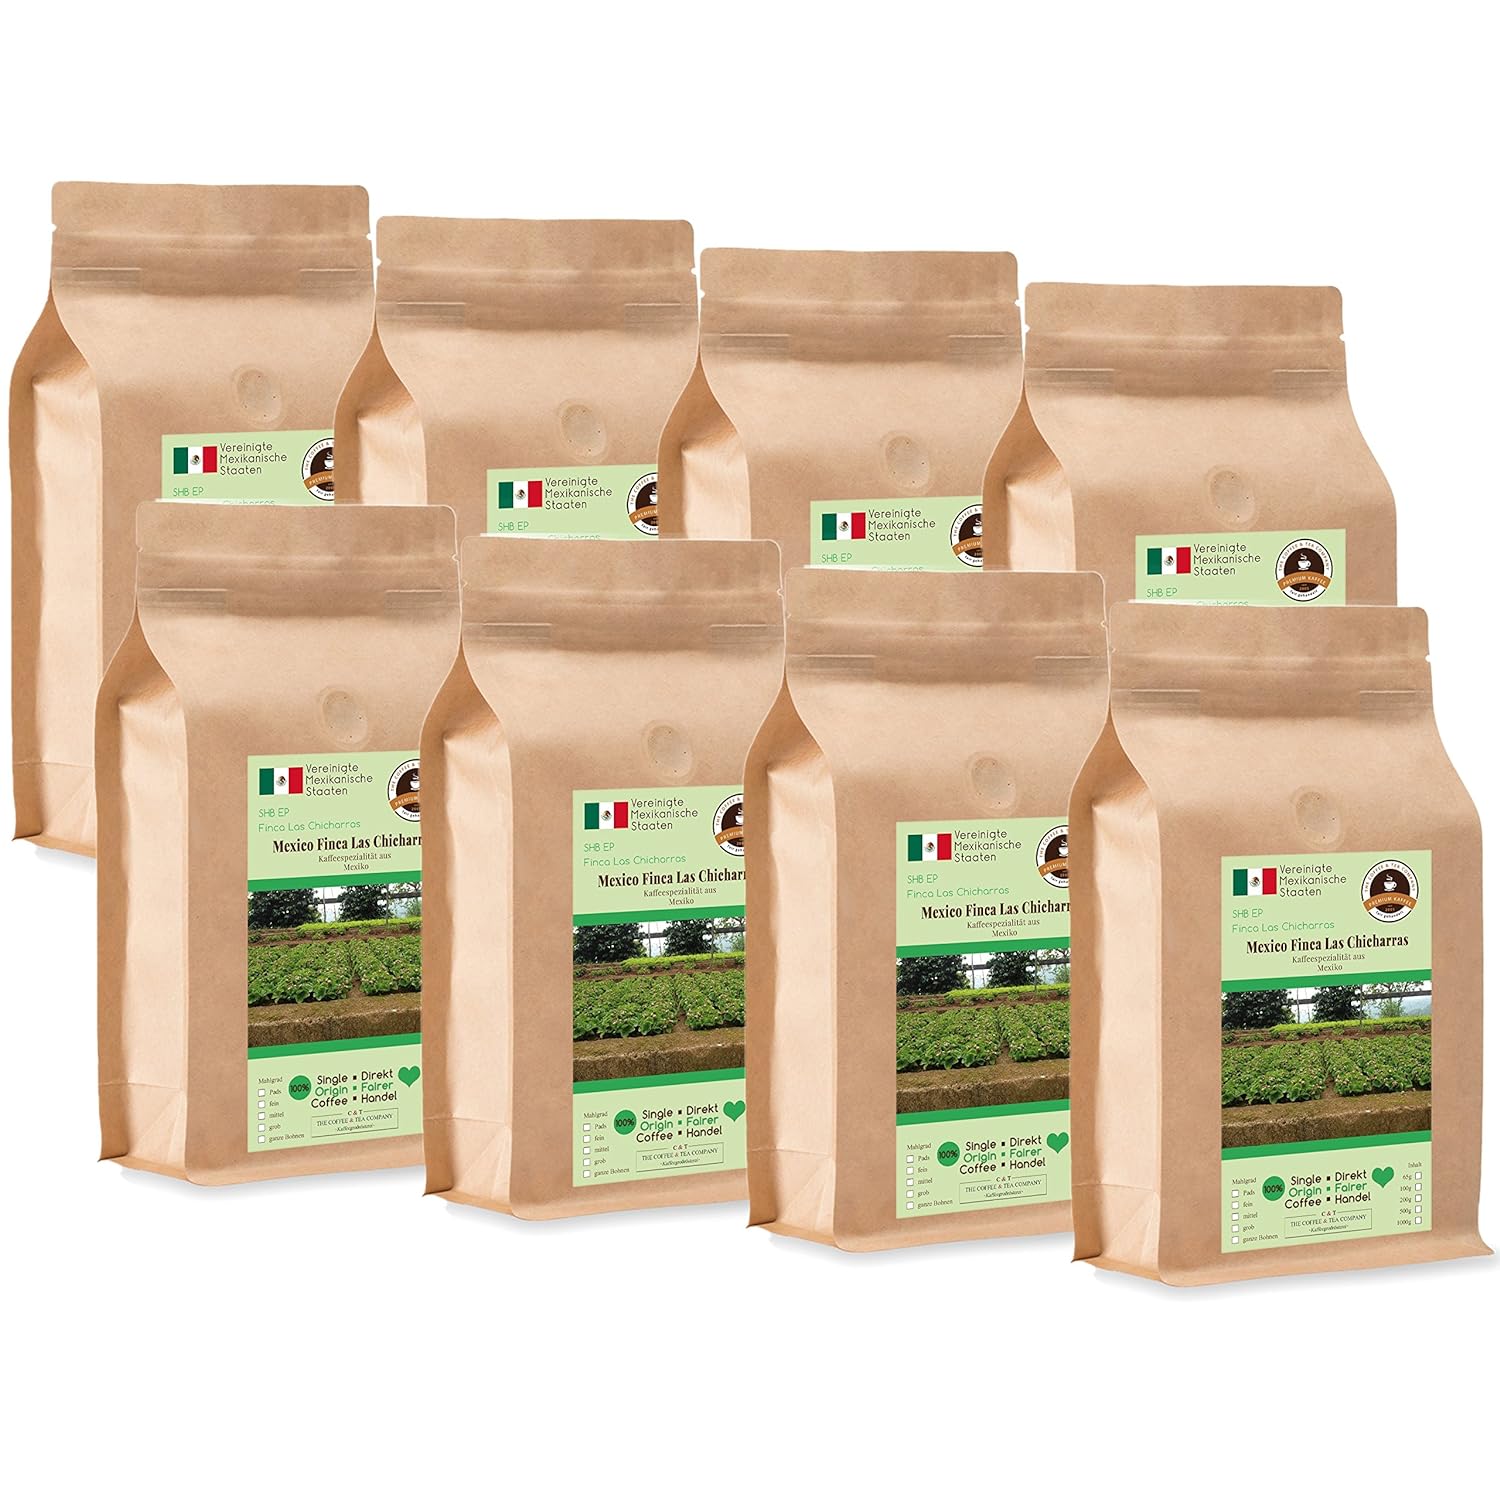 Coffee Globetrotter - Coffee with Heart - Mexico Finca Las Chicharras - 8 x 1000 g Very Fine Ground - for Fully Automatic Coffee Grinder - Roasted Coffee Fair Trade | Gastropack Economy Pack